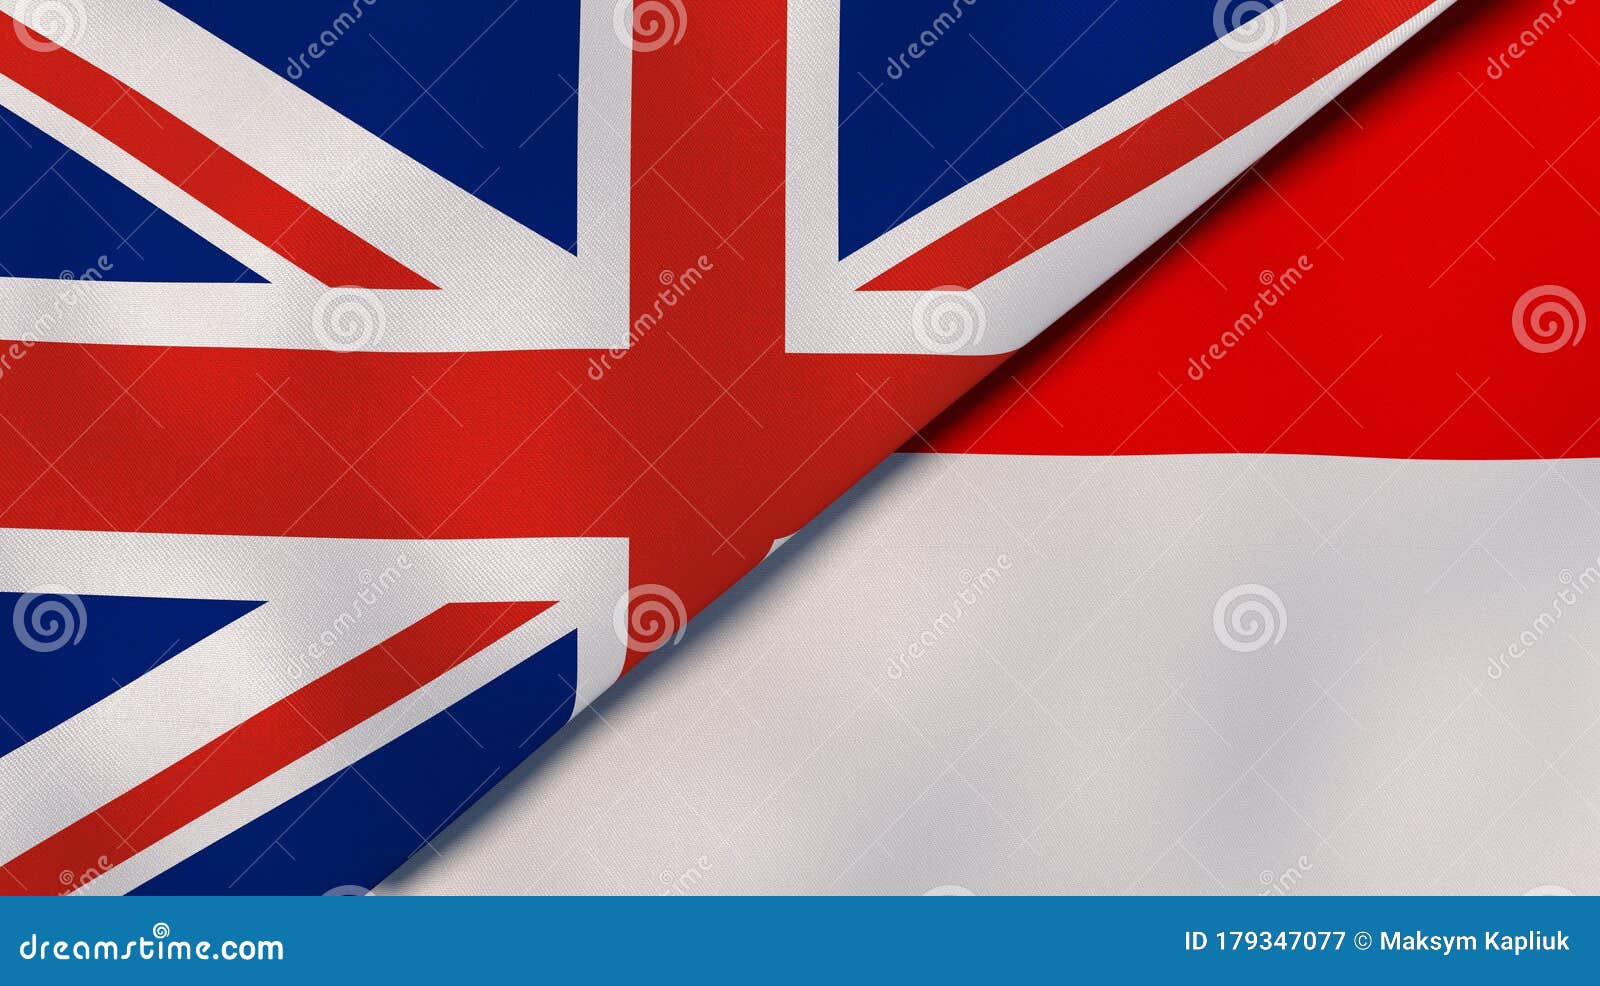 The Flags Of United Kingdom And Indonesia News Reportage Business Background 3d Illustration Stock Illustration Illustration Of English International